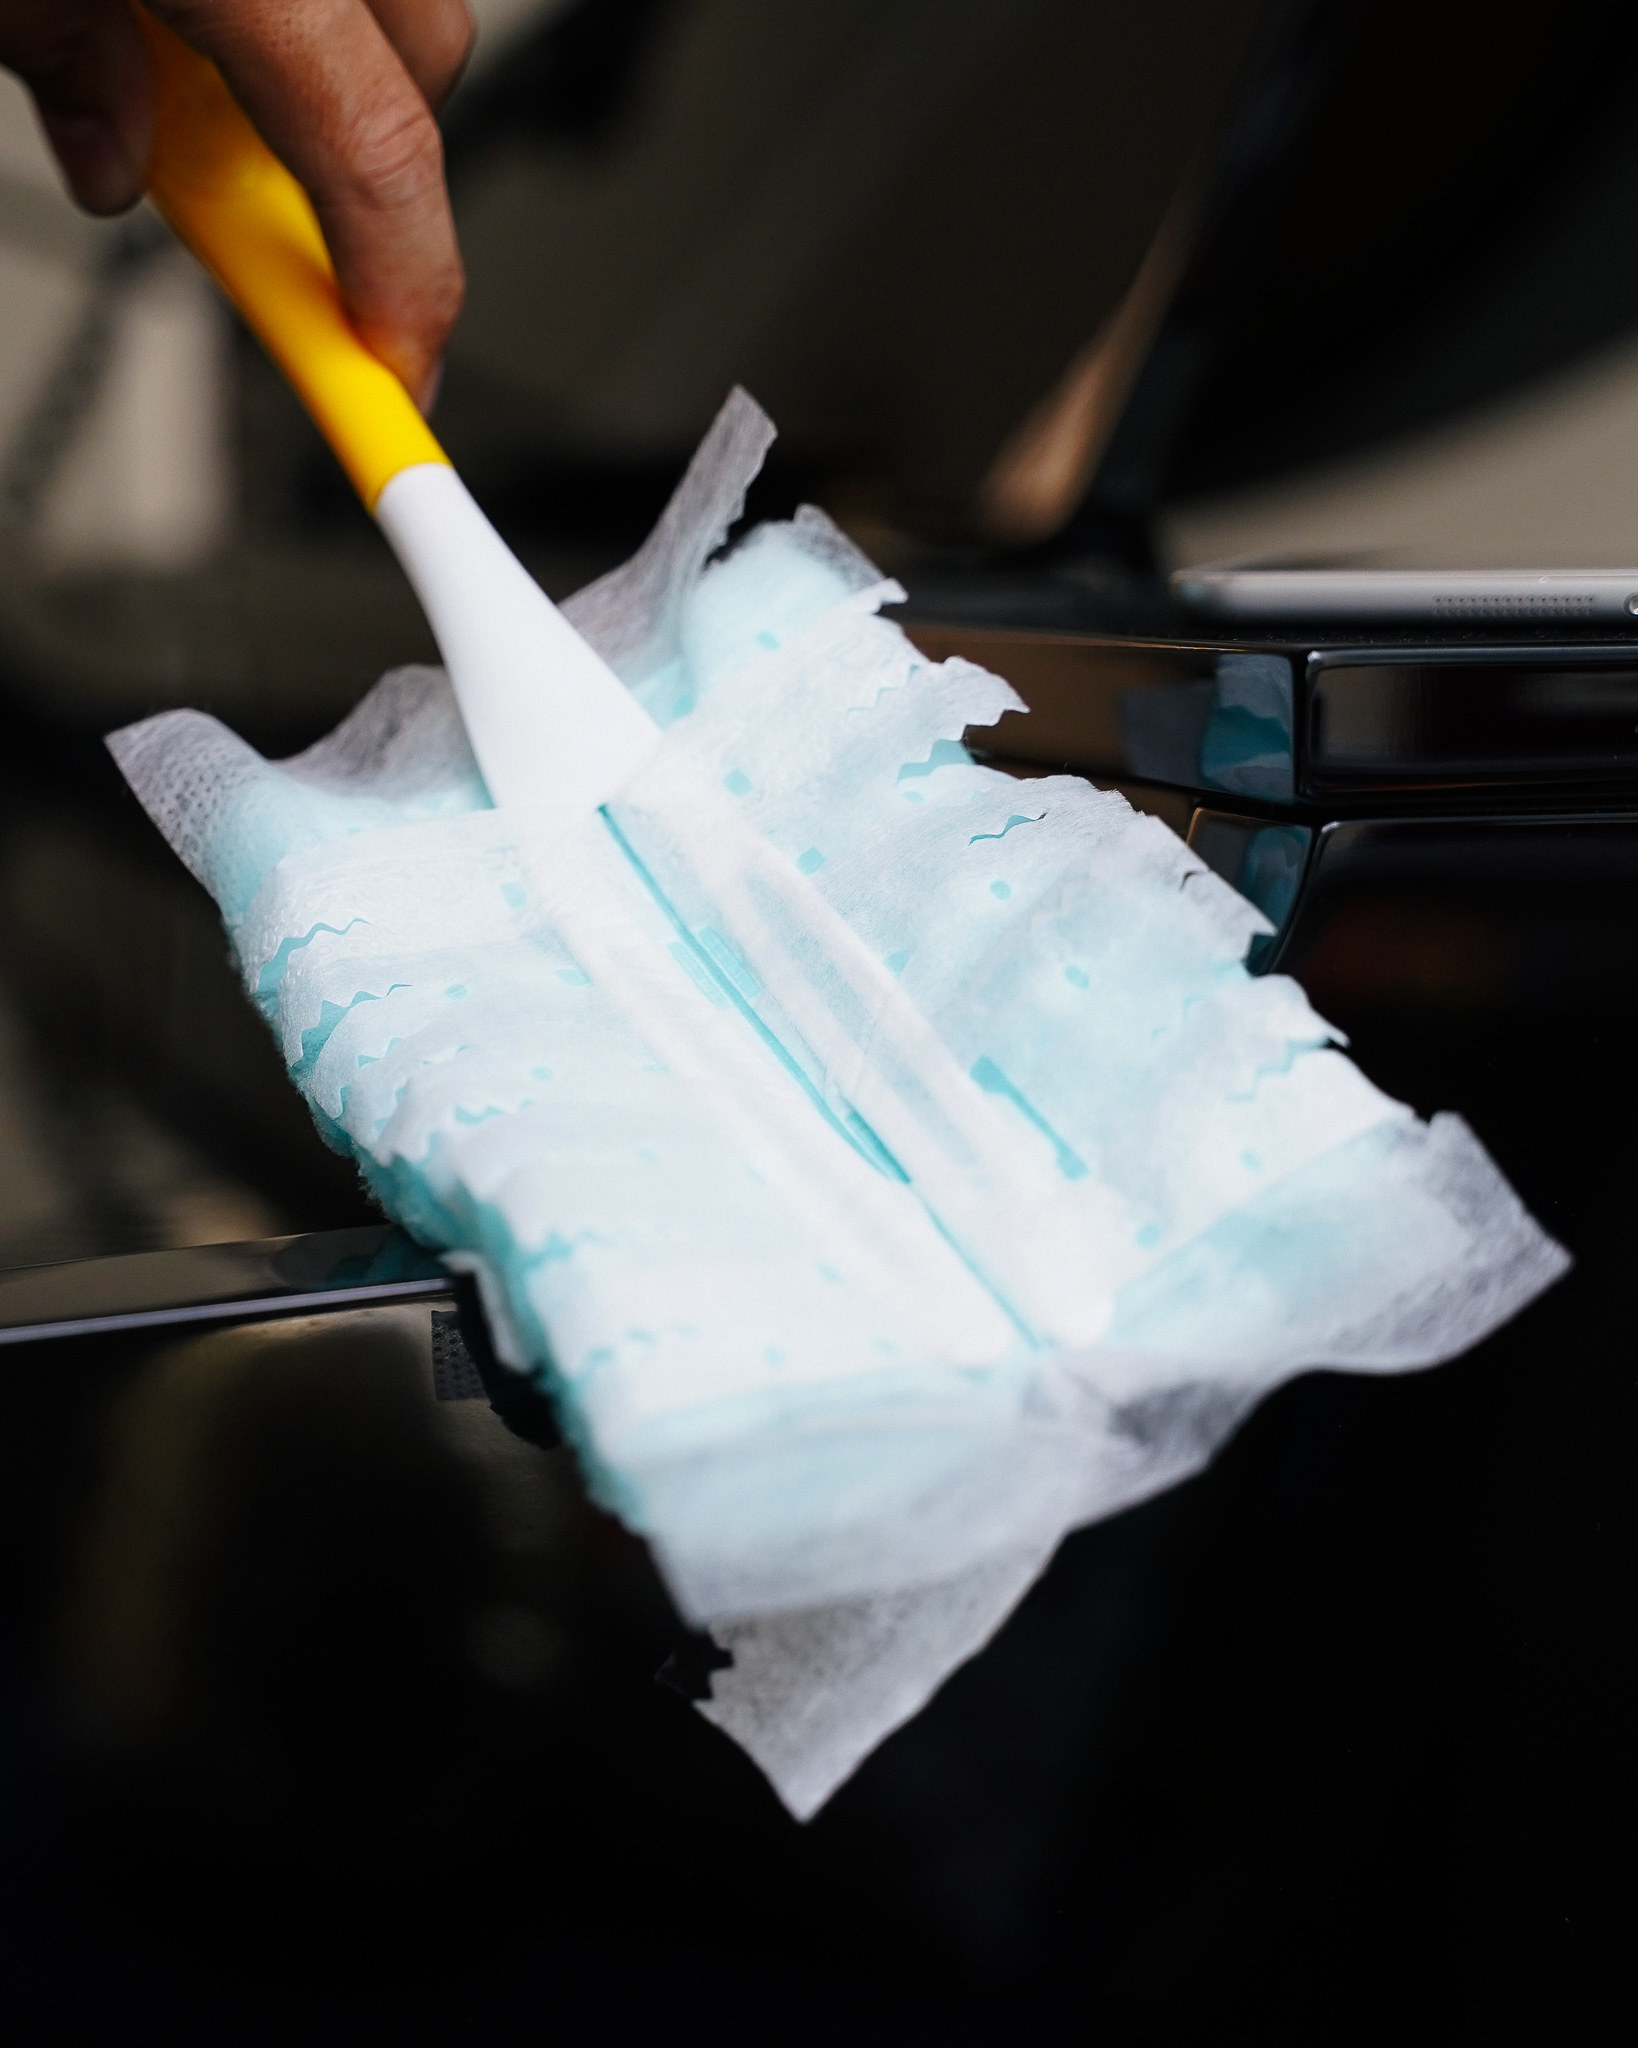 A close up of Swiffer duster that&#x27;s being used on a shiny piano.